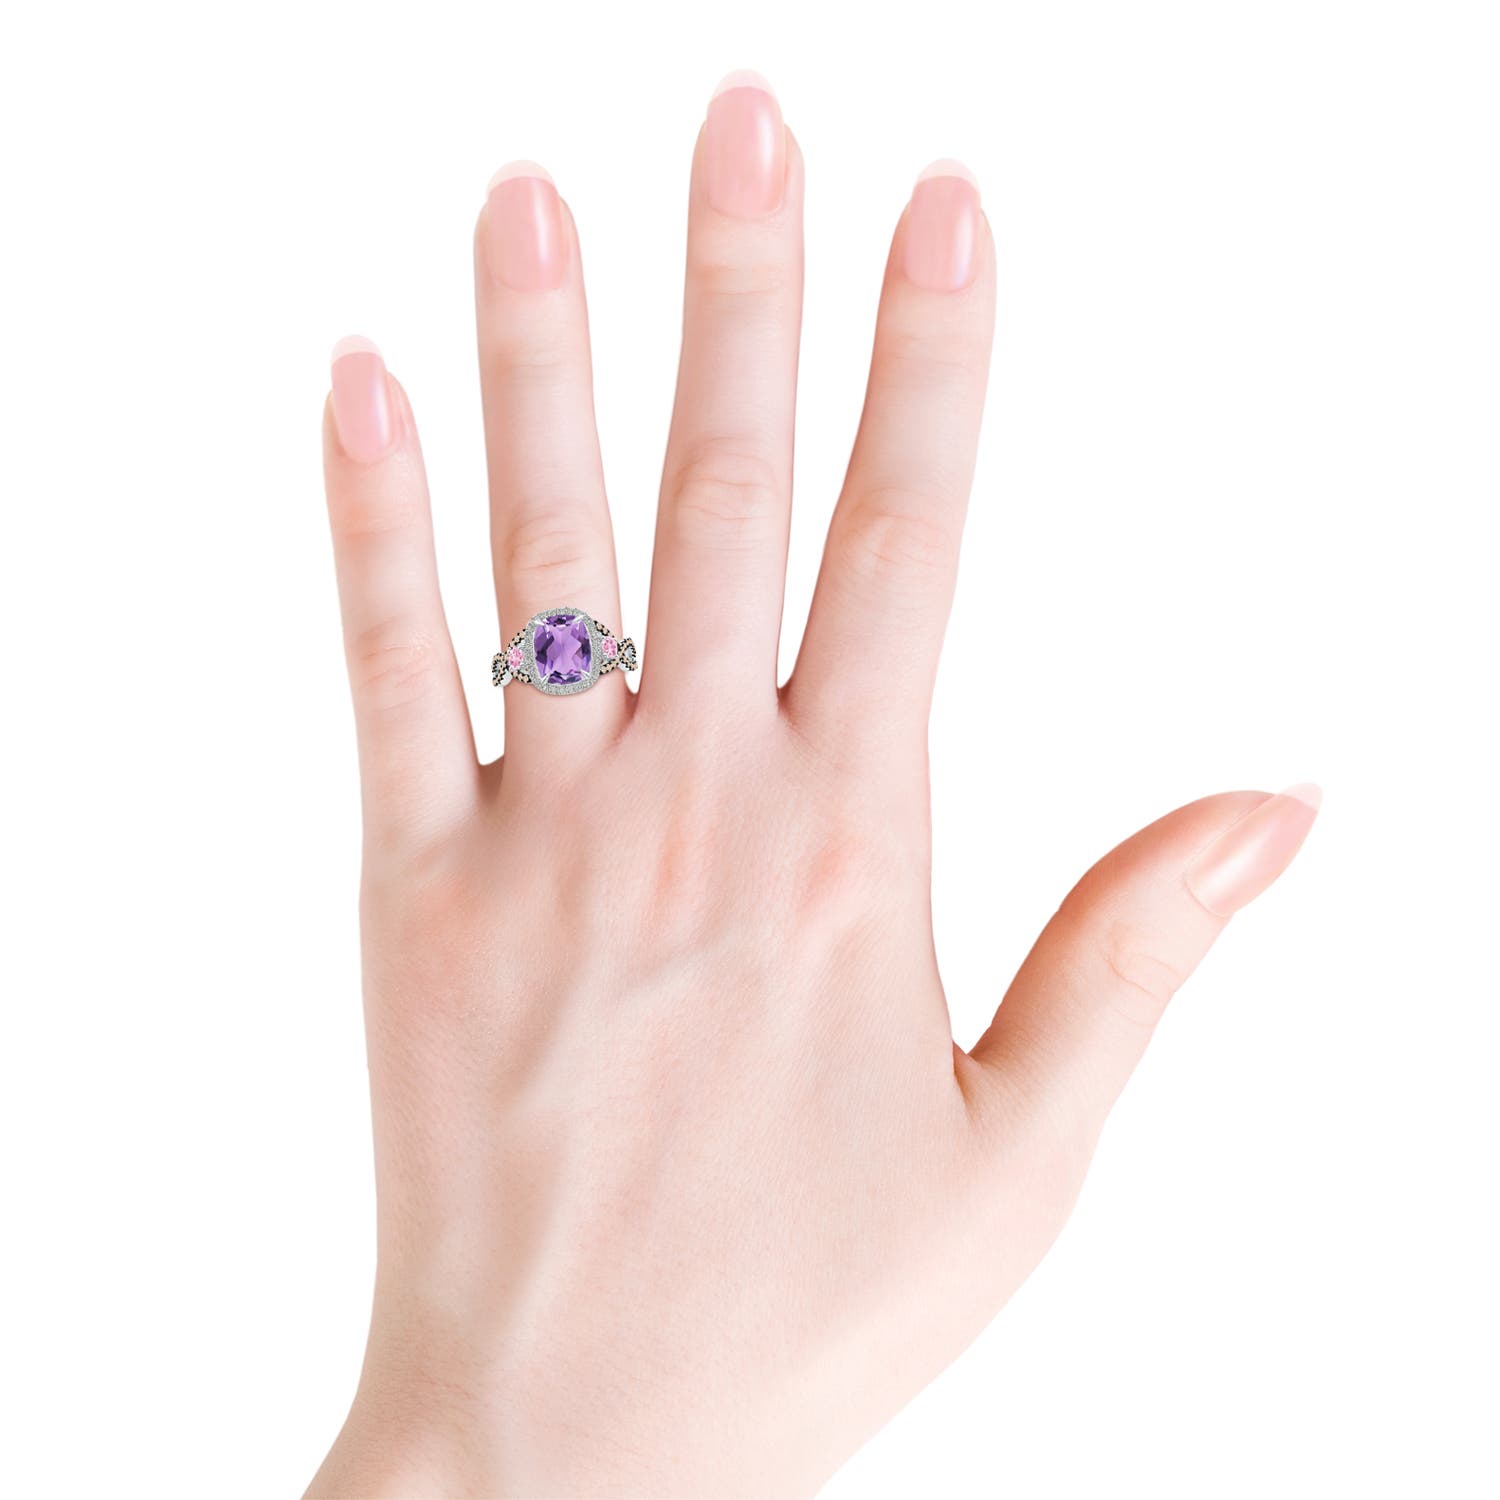 A - Amethyst / 2.59 CT / 14 KT White Gold